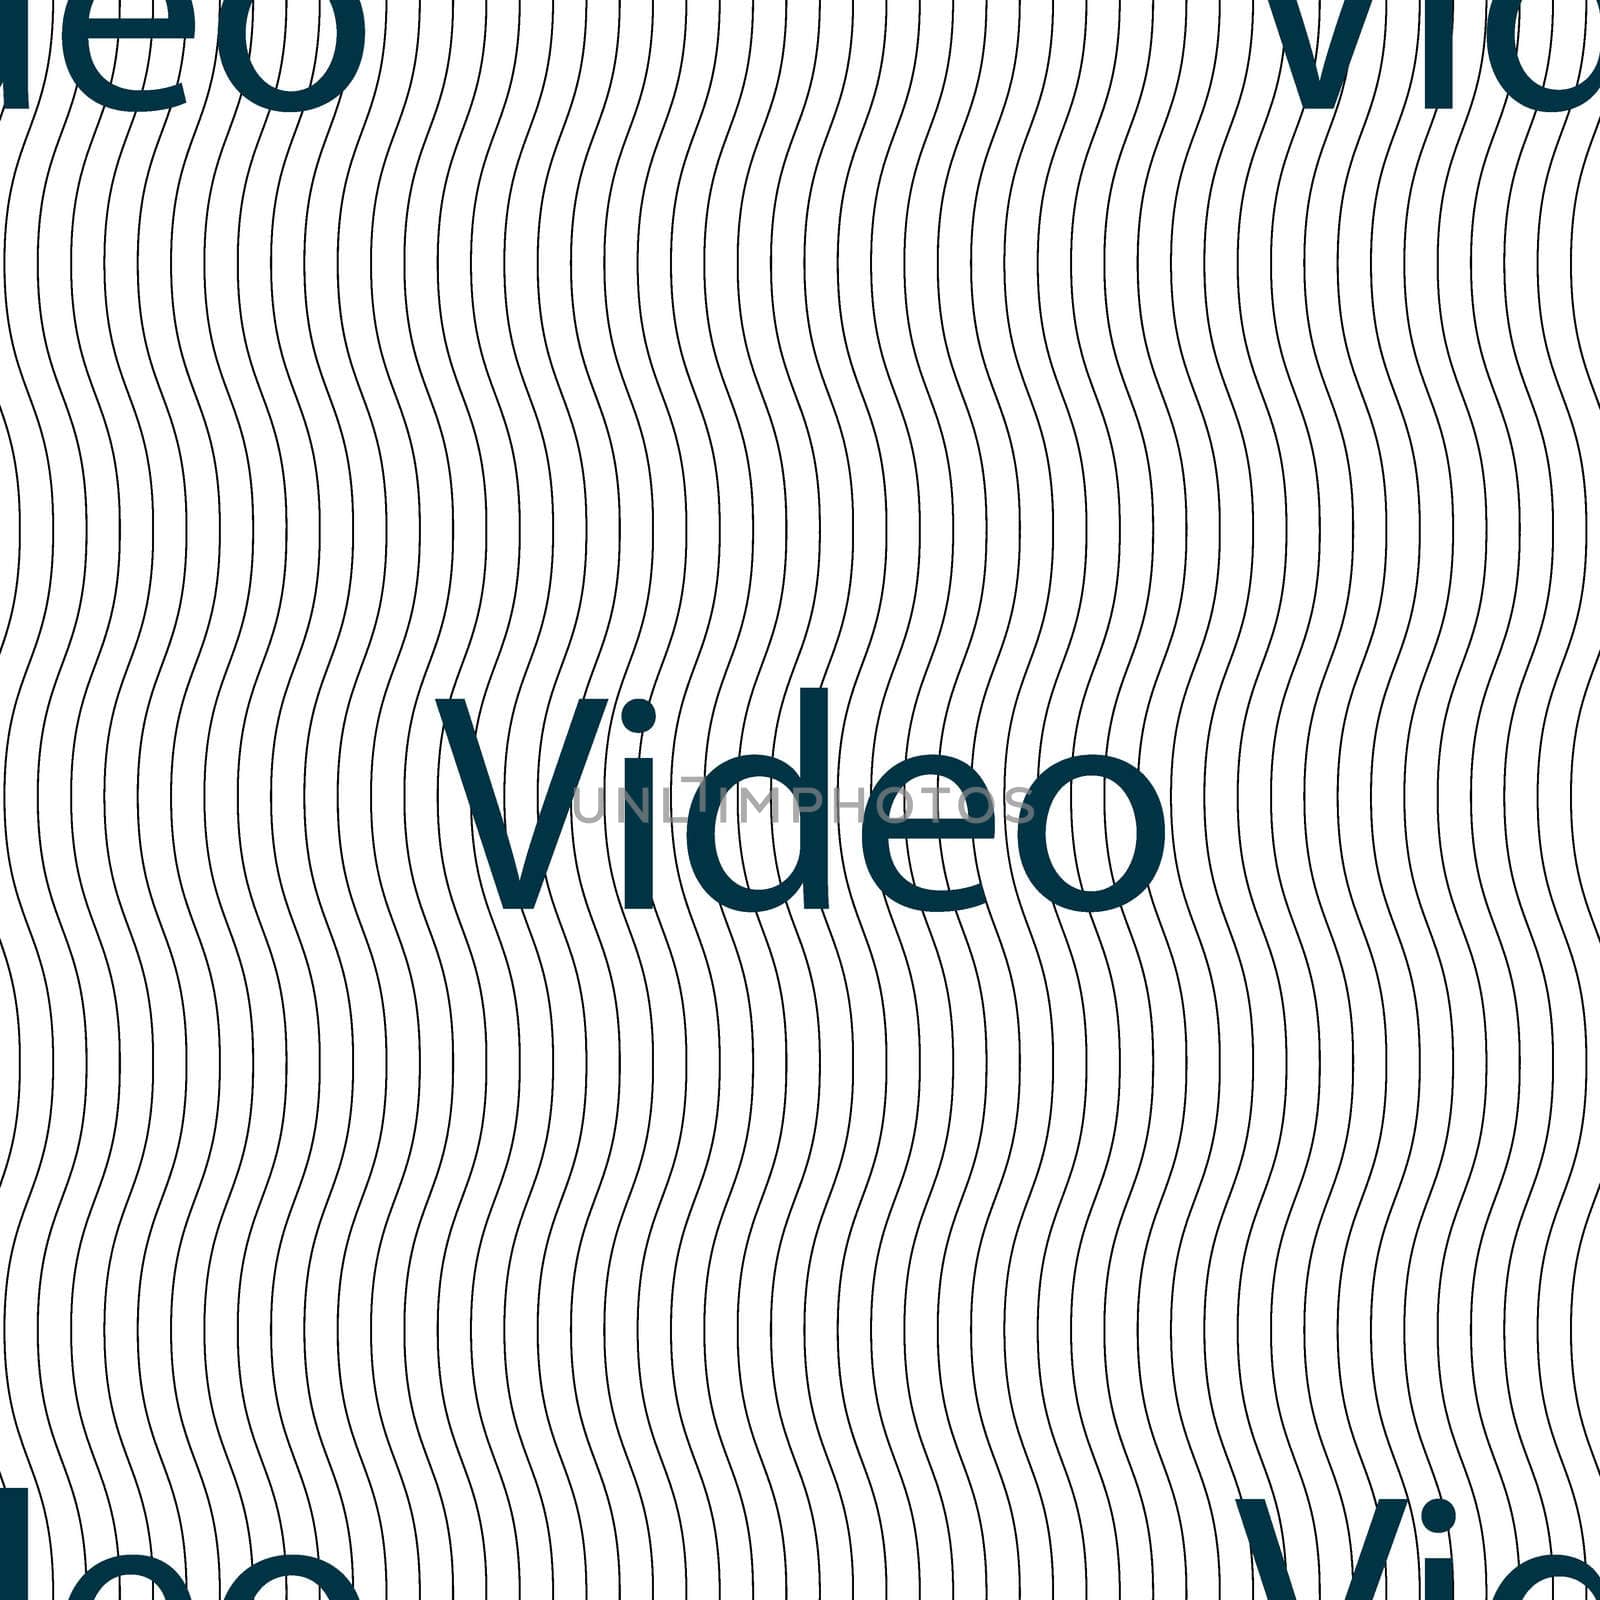 Play video sign icon. Player navigation symbol. Seamless pattern with geometric texture. illustration